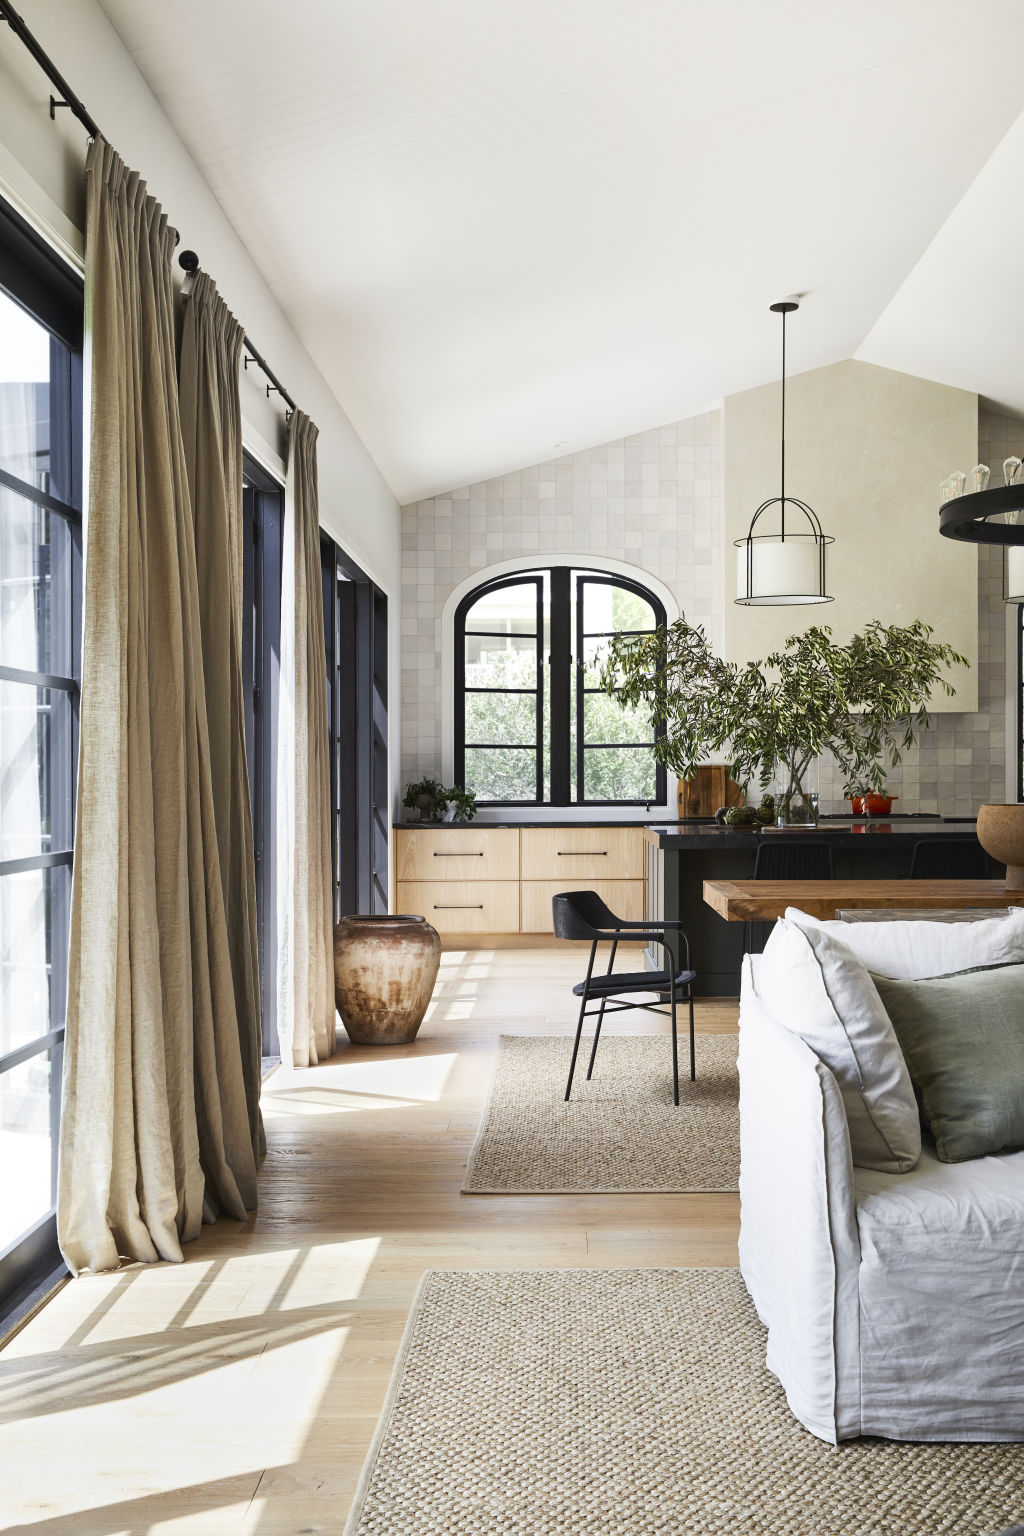 Earthy organic finishes will stand the test of time, according to Kate Walker of KWD. Interiors by KWD. Photo: Armelle Habib